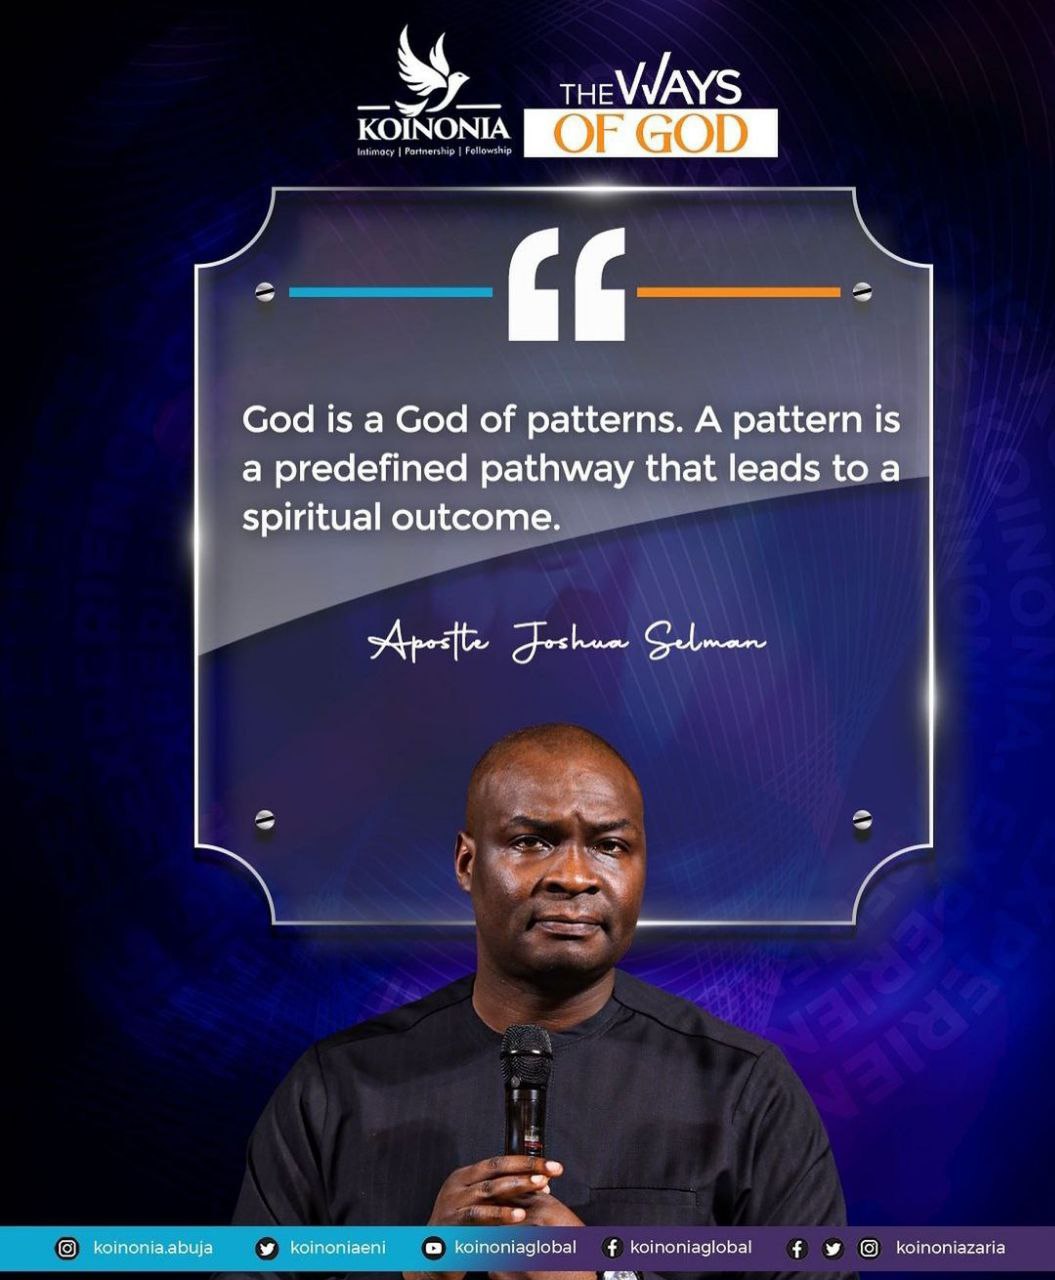 DOWNLOAD MP3: THE WAYS OF GOD by Apostle Joshua Selman (May 7, 2023) 16